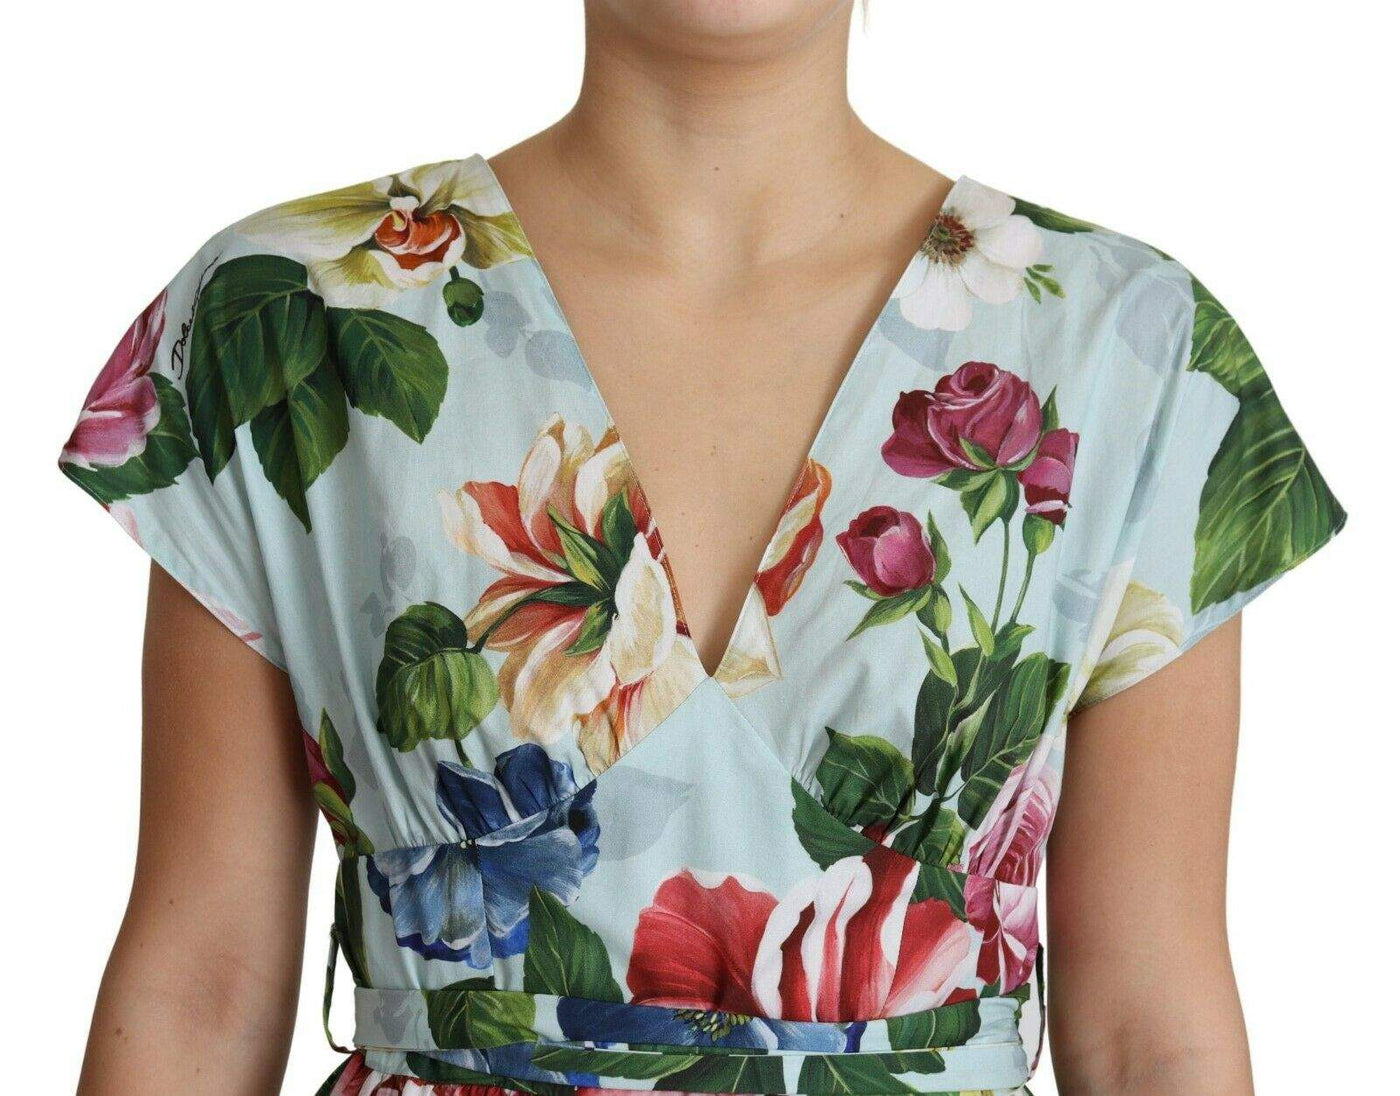 Dolce & Gabbana Green Floral Short Sleeves V-neck Dress Dolce & Gabbana, Dresses - Women - Clothing, feed-agegroup-adult, feed-color-Green, feed-gender-female, Green, IT42|M, IT44|L, IT46|XL at SEYMAYKA